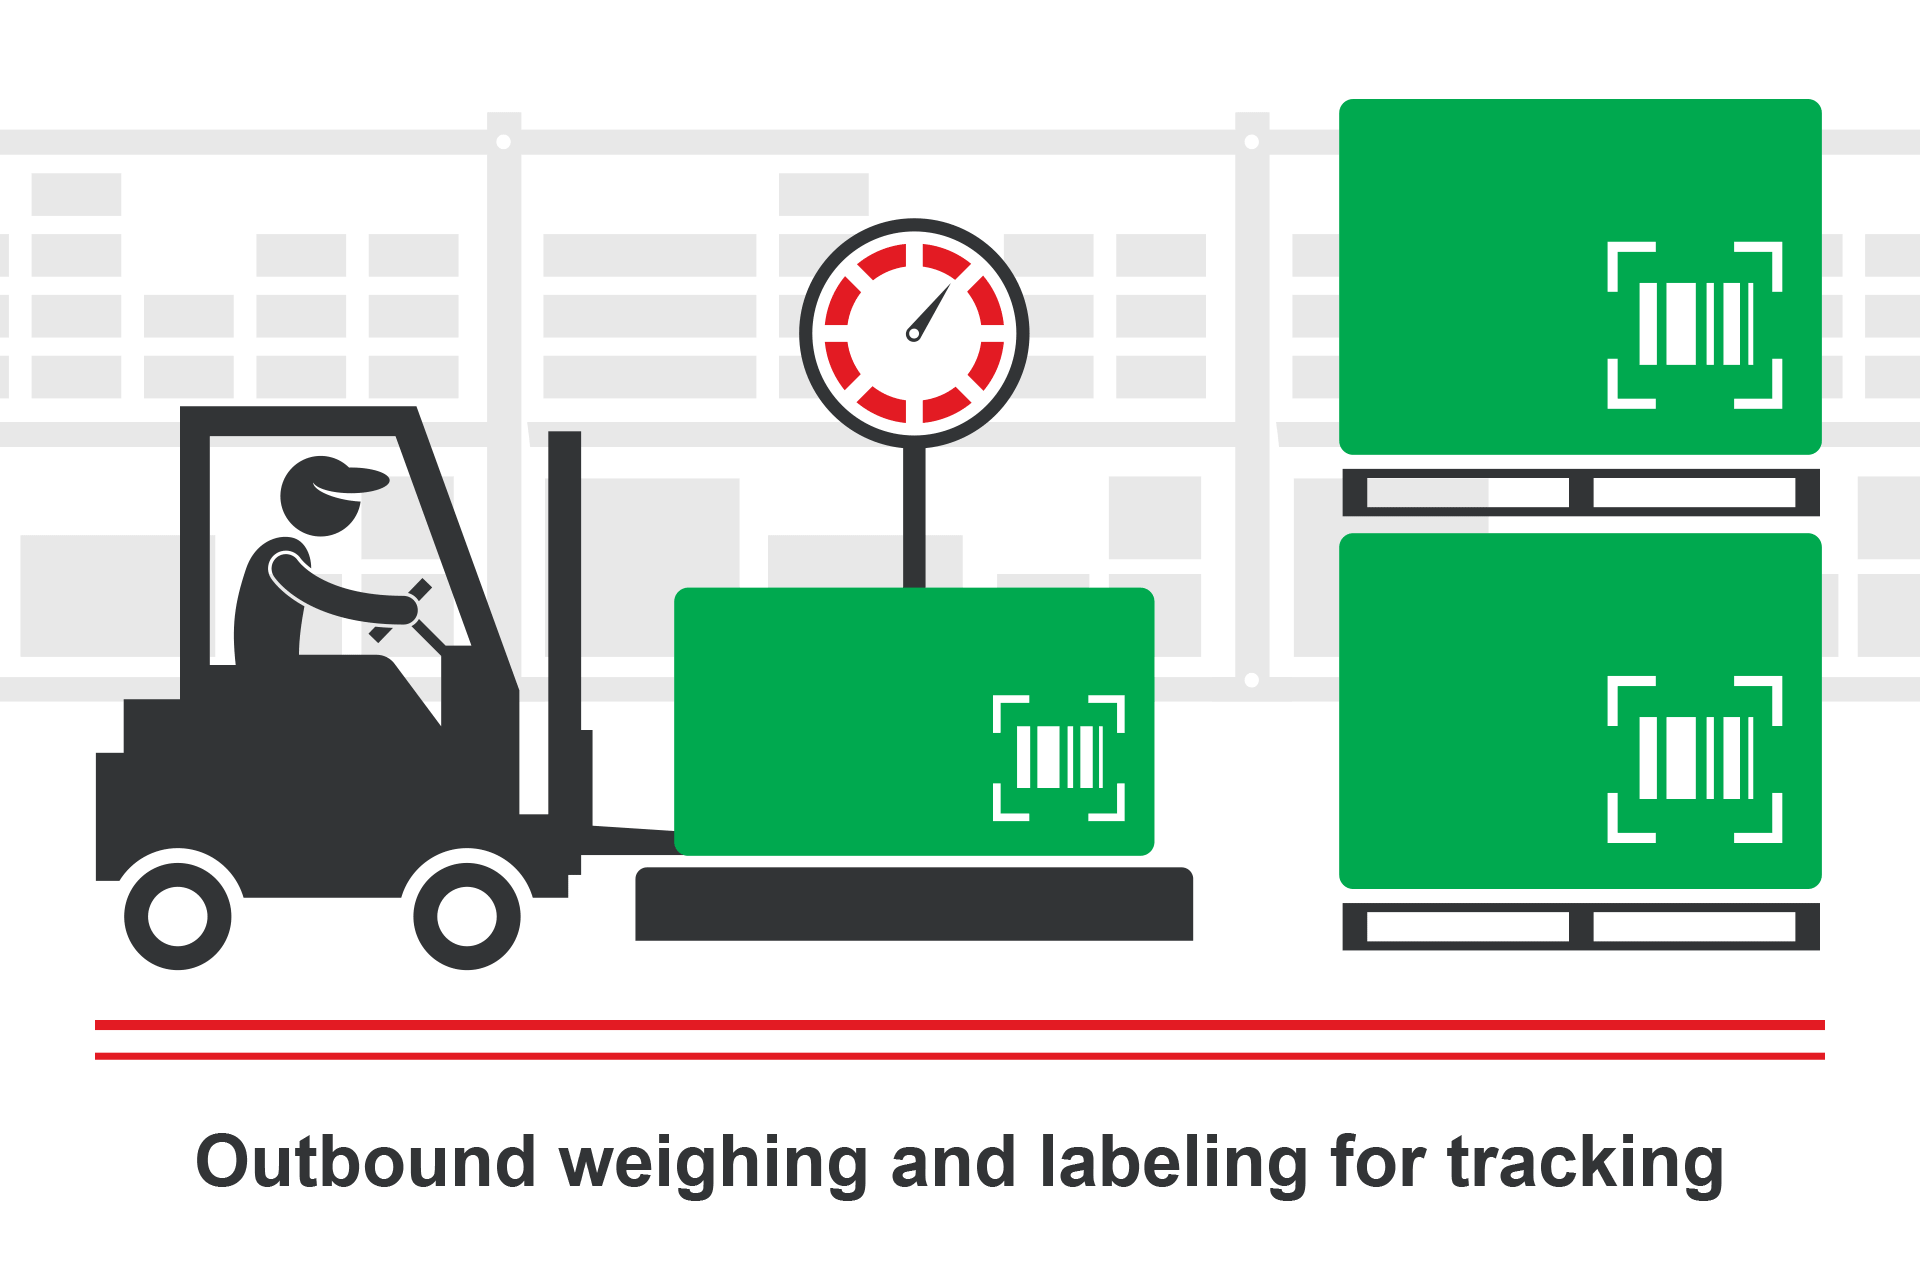 Outbound weighing and labeling for tracking